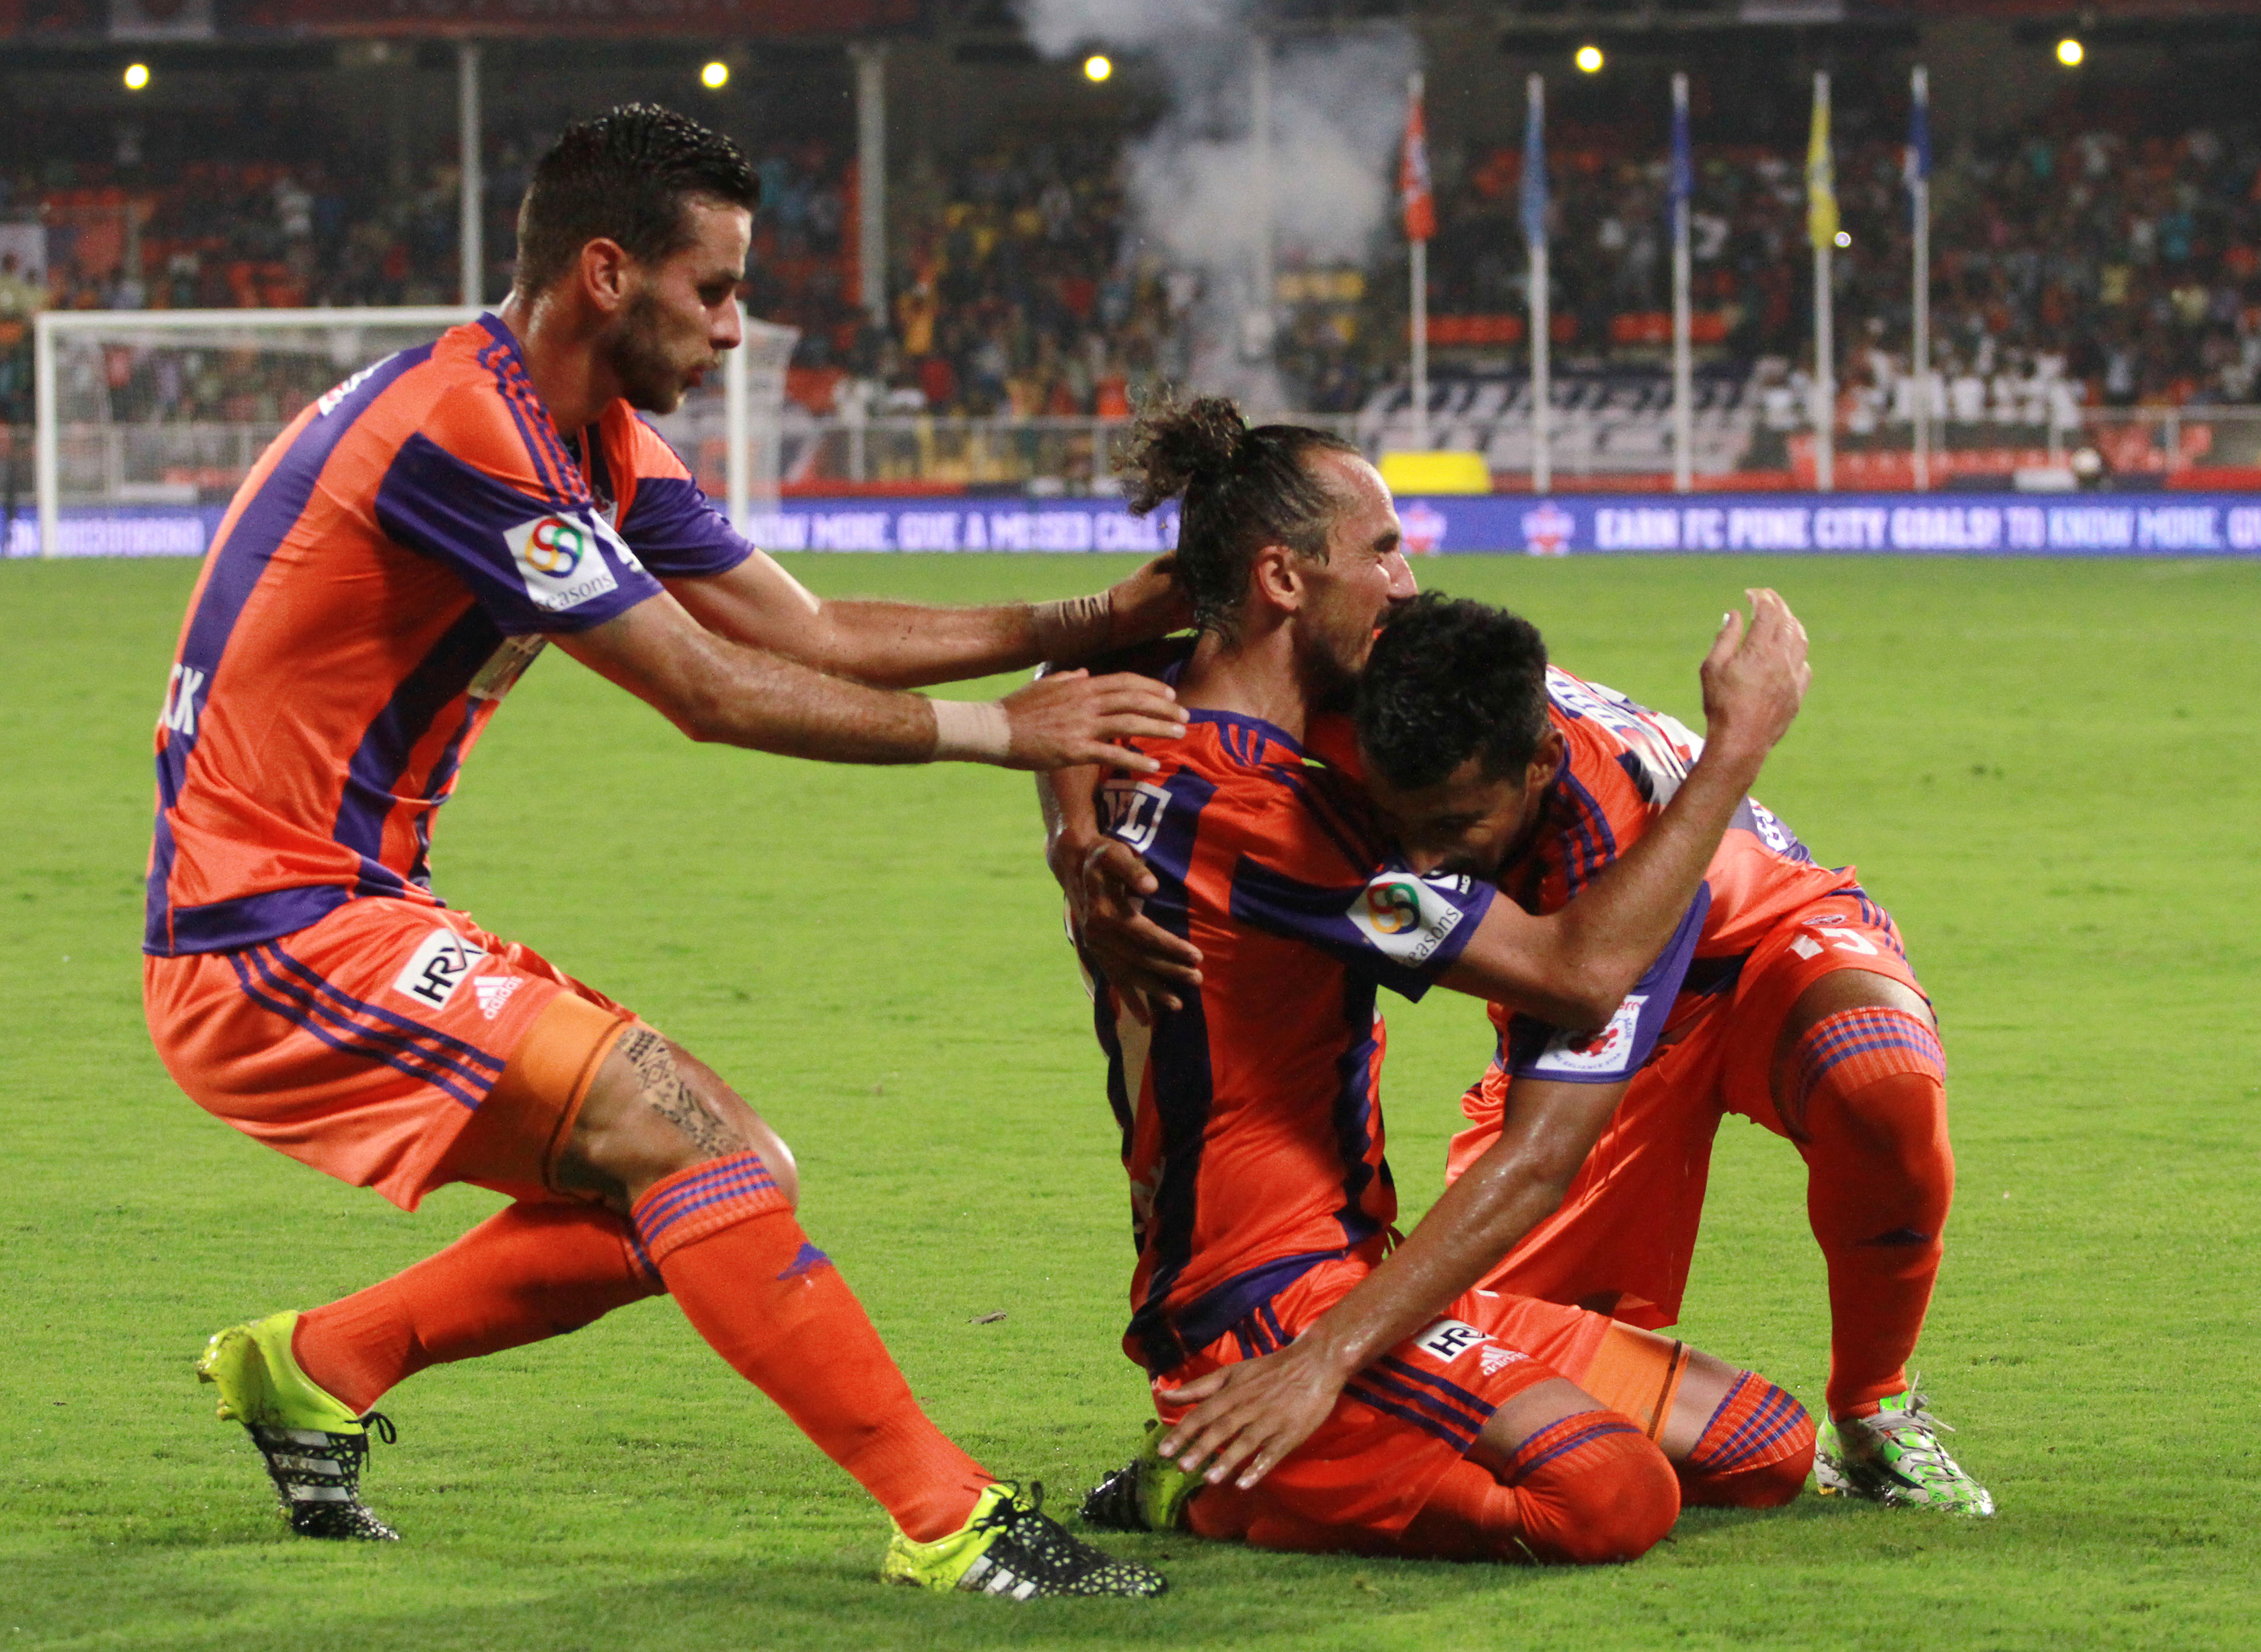 FC Pune City players celebrates a goal during match 3 of the Indian Super League (ISL) season 2  between FC Pune City and Mumbai City FC held at the Shree Shiv Chhatrapati Sports Complex Stadium, Pune, India on the 5th October 2015.

Photo by Vipin Pawar / ISL/ SPORTZPICS